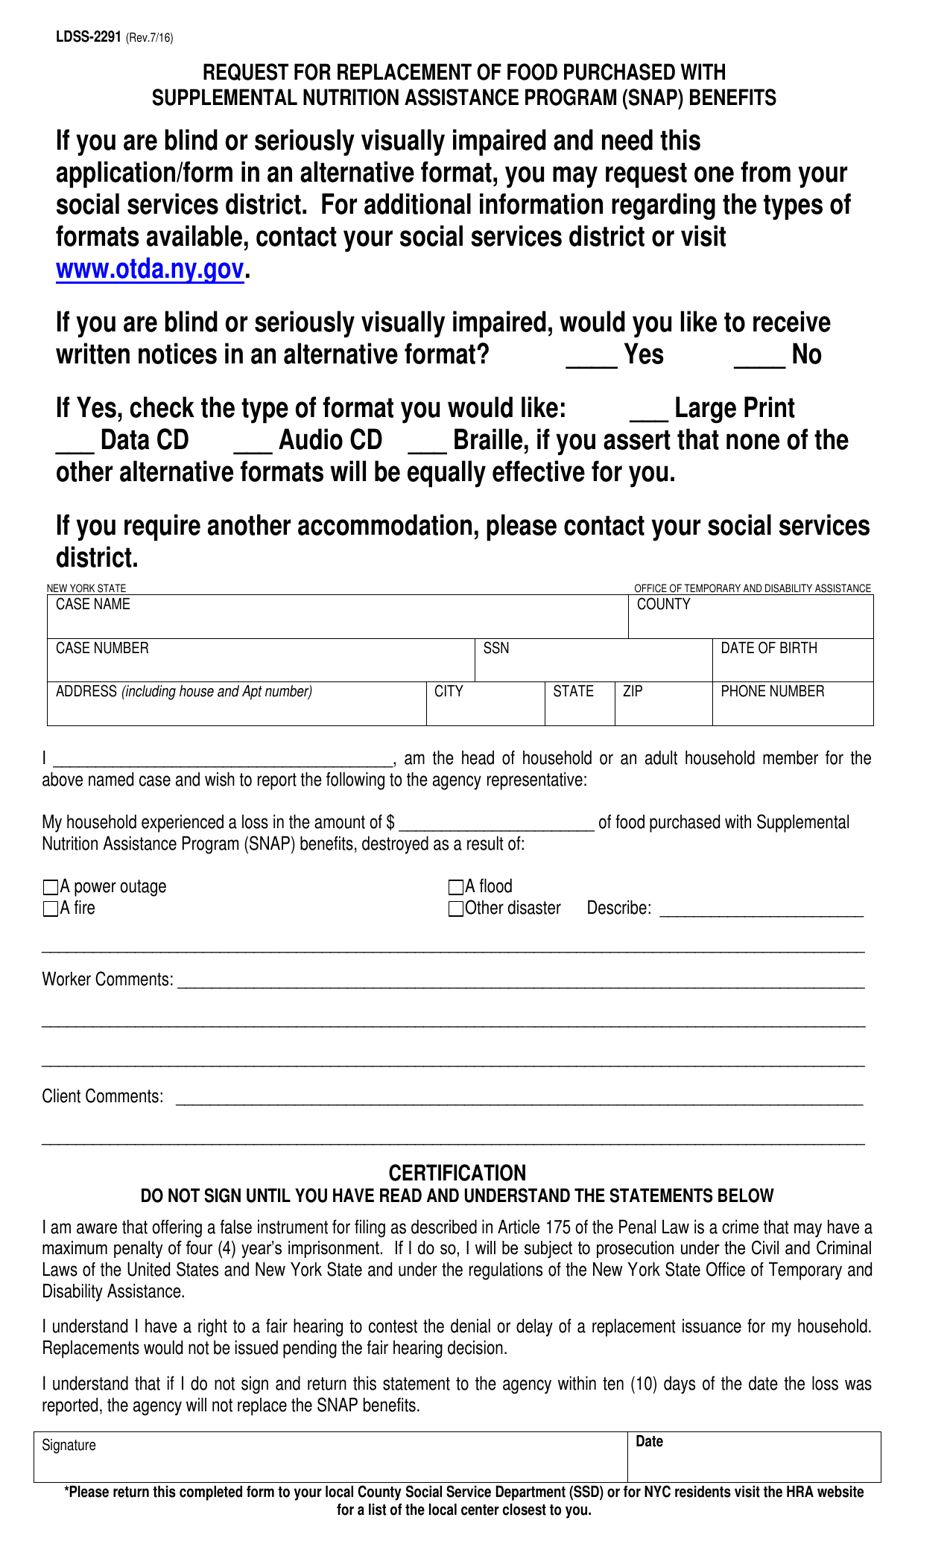 Form LDSS-2291 Request for Replacement of Food Purchased With Supplemental Nutrition Assistance Program (Snap) Benefits - New York (English / Bengali), Page 1